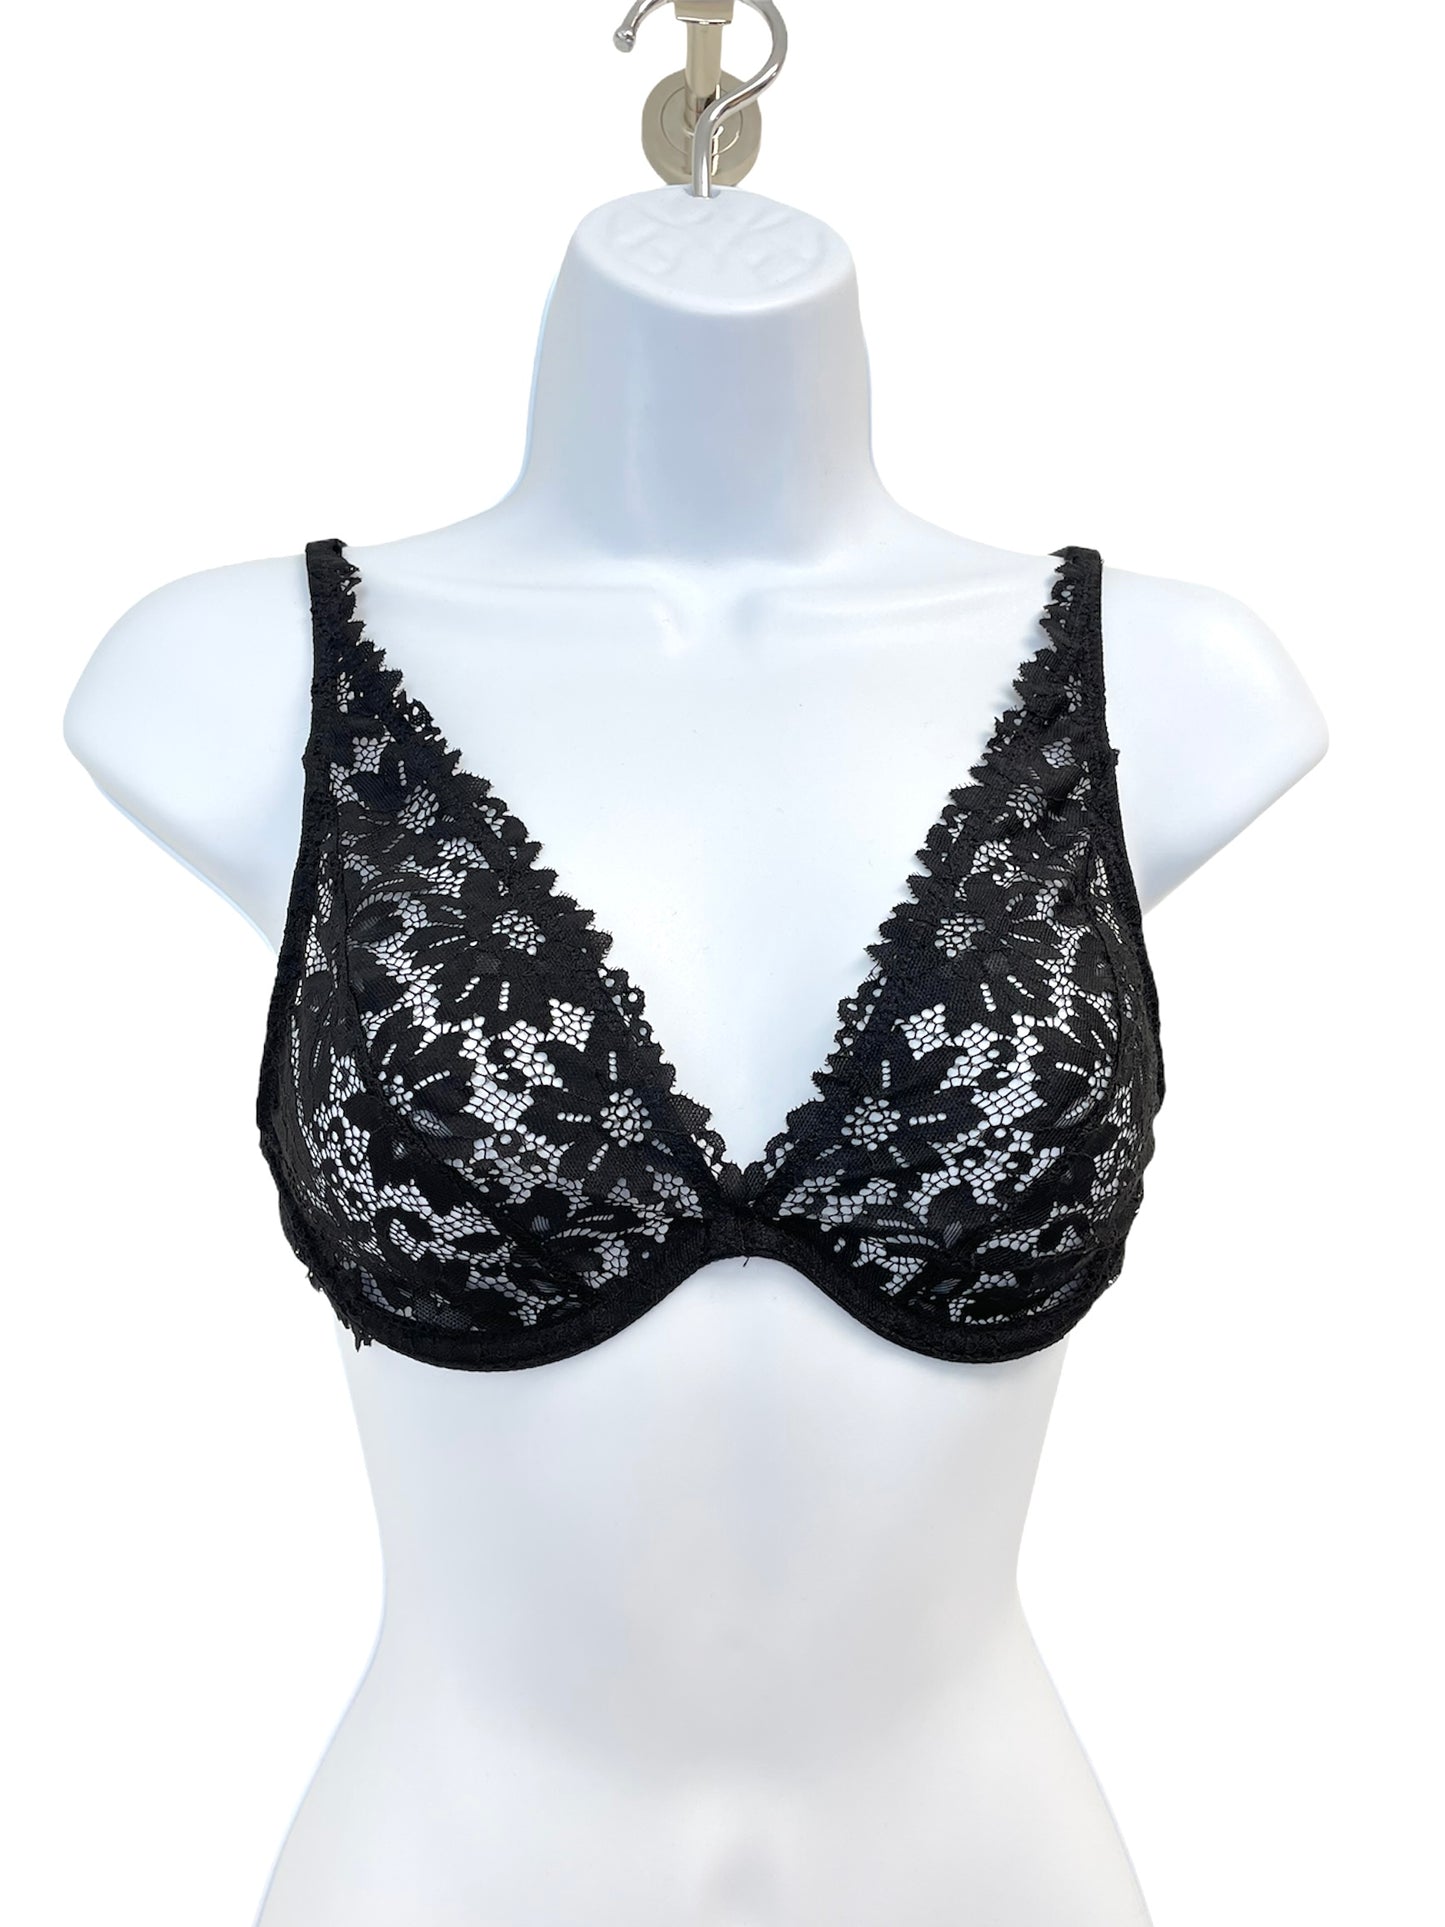 Urban Outfitters Ladies Comfort V-Neck Lace Bra Top Black